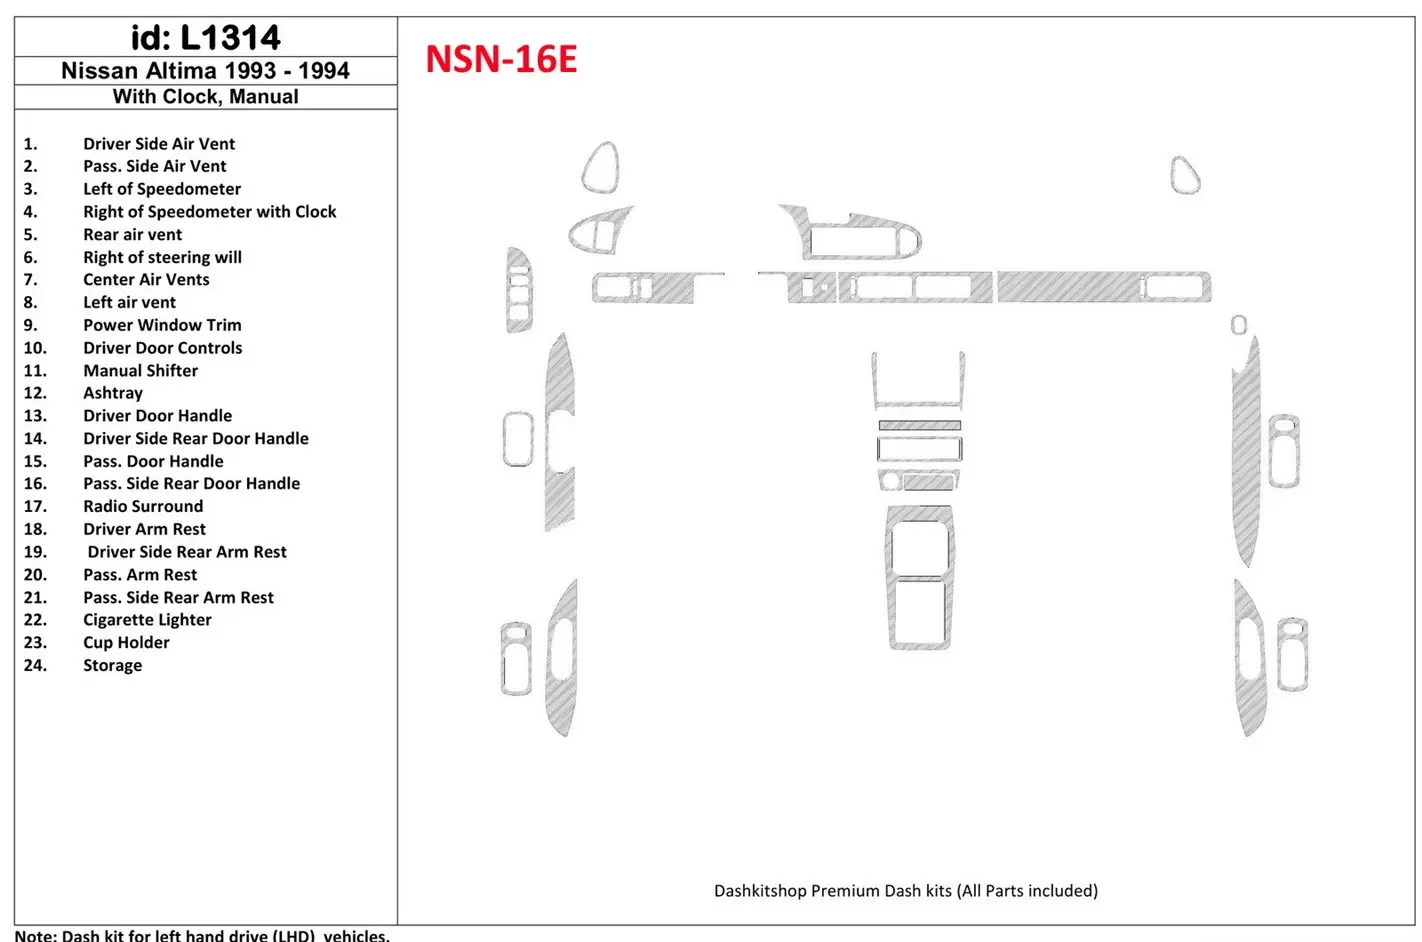 Nissan Altima 1993-1993 Automatic Gearbox, With watches, Without OEM, 23 Parts set BD Interieur Dashboard Bekleding Volhouder